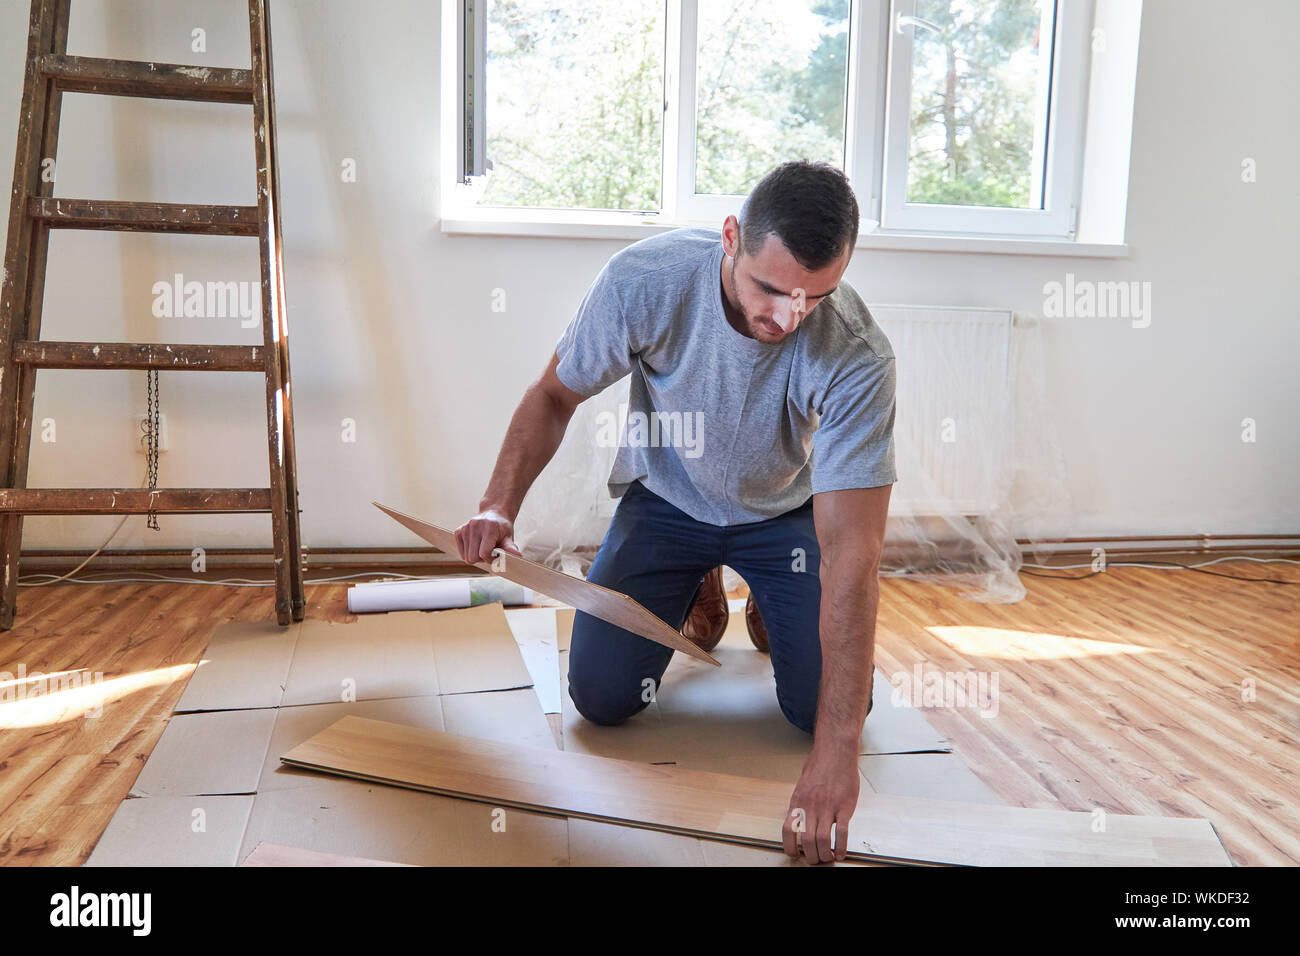 Man As A Craftsman Or Do It Yourself Worker Laying Hardwood Floor